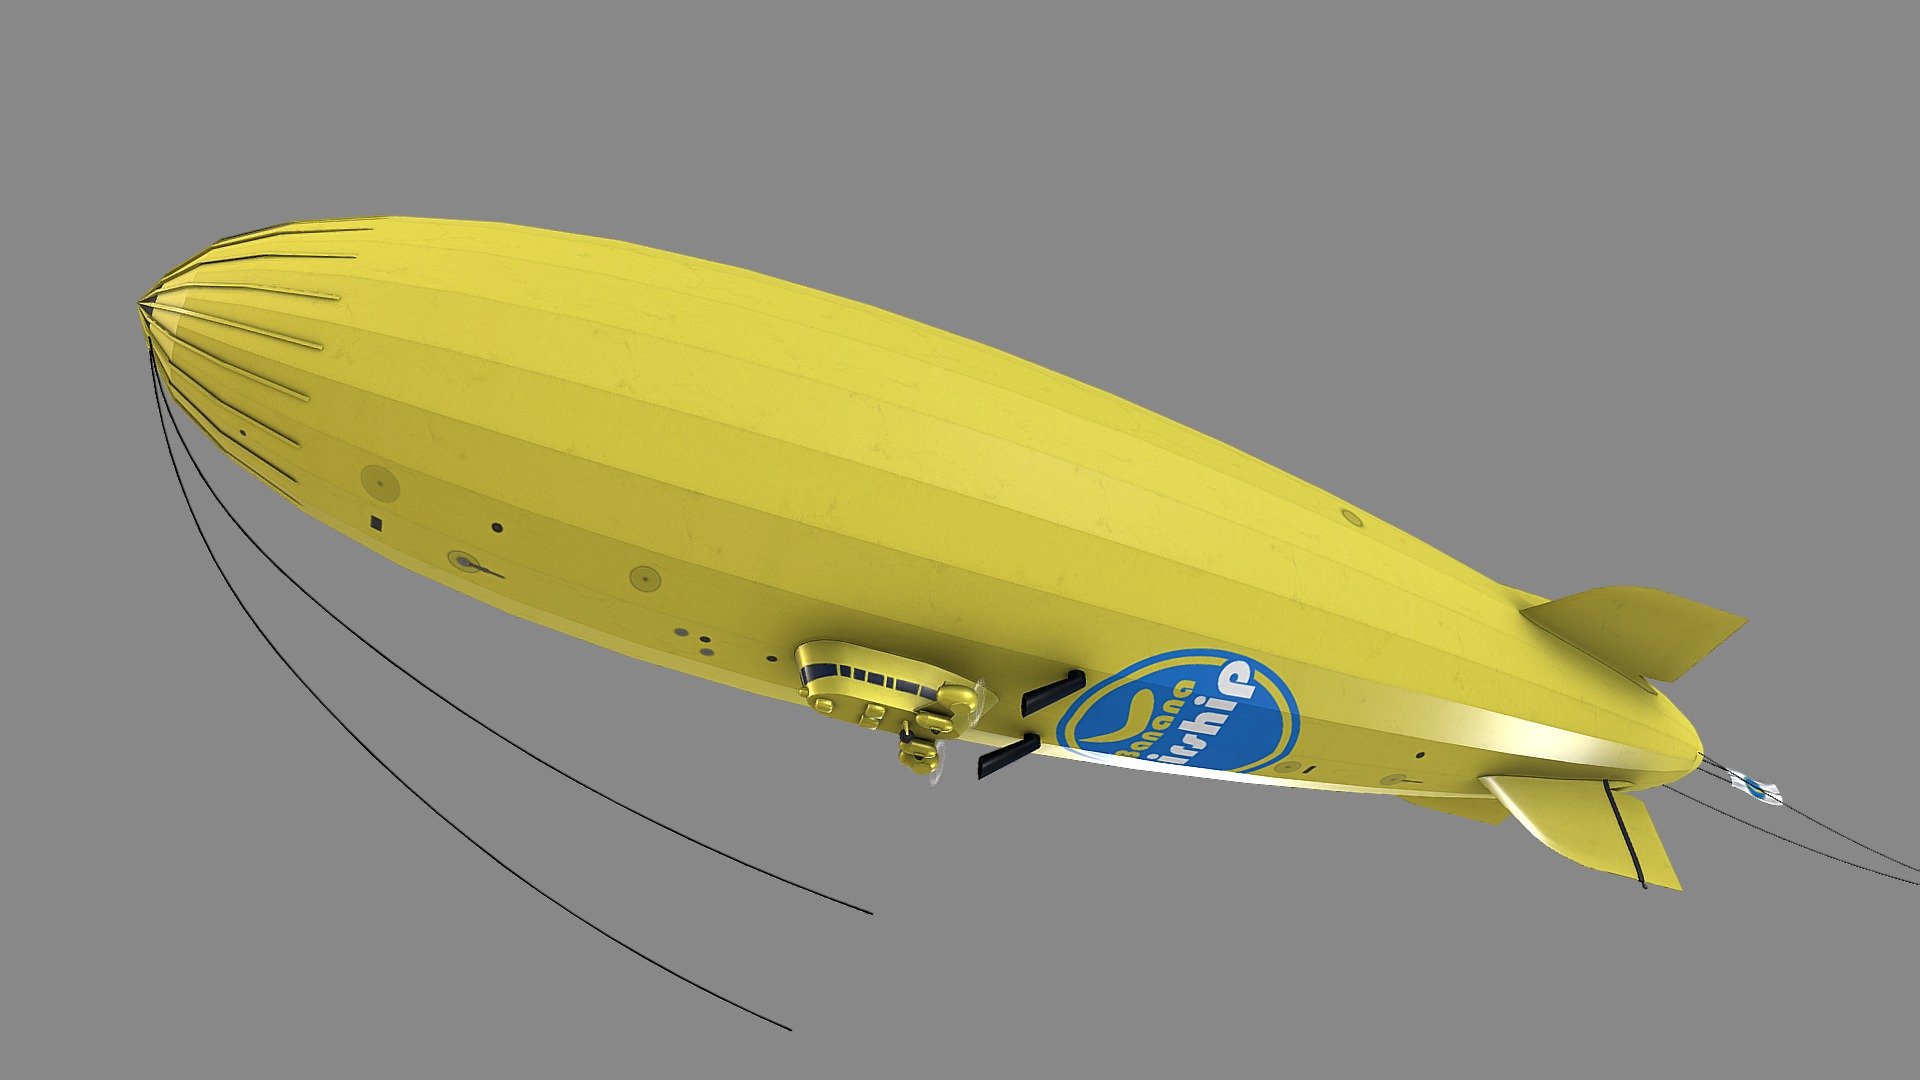 Low Poly Airship Blimp - Banana Airship Livery

Part of collection:




https://skfb.ly/oUnoY

Details:




Game ready, PBR ready, realtime optimized

Included are 2 animated model versions with 180 frames @ 30 fps

FBX export contains pure rotation based animations, that work best with the Sketchfab viewer

3dsMax file contains also an extended animated version with modifiers

Static model version included as well

Made in real world scale meters

Non-overlapping unwrapped on 1 UV layout

Ideal as good quality background object

PBR textures:




12 x both PBR workflows ready textures in native 4K

Propellers got 512x512 textures resolution

Triangle count:




Complete 4.020 tris
 - Low Poly Airship Blimp - Banana Airship Livery - Buy Royalty Free 3D model by 3dgtx 3d model